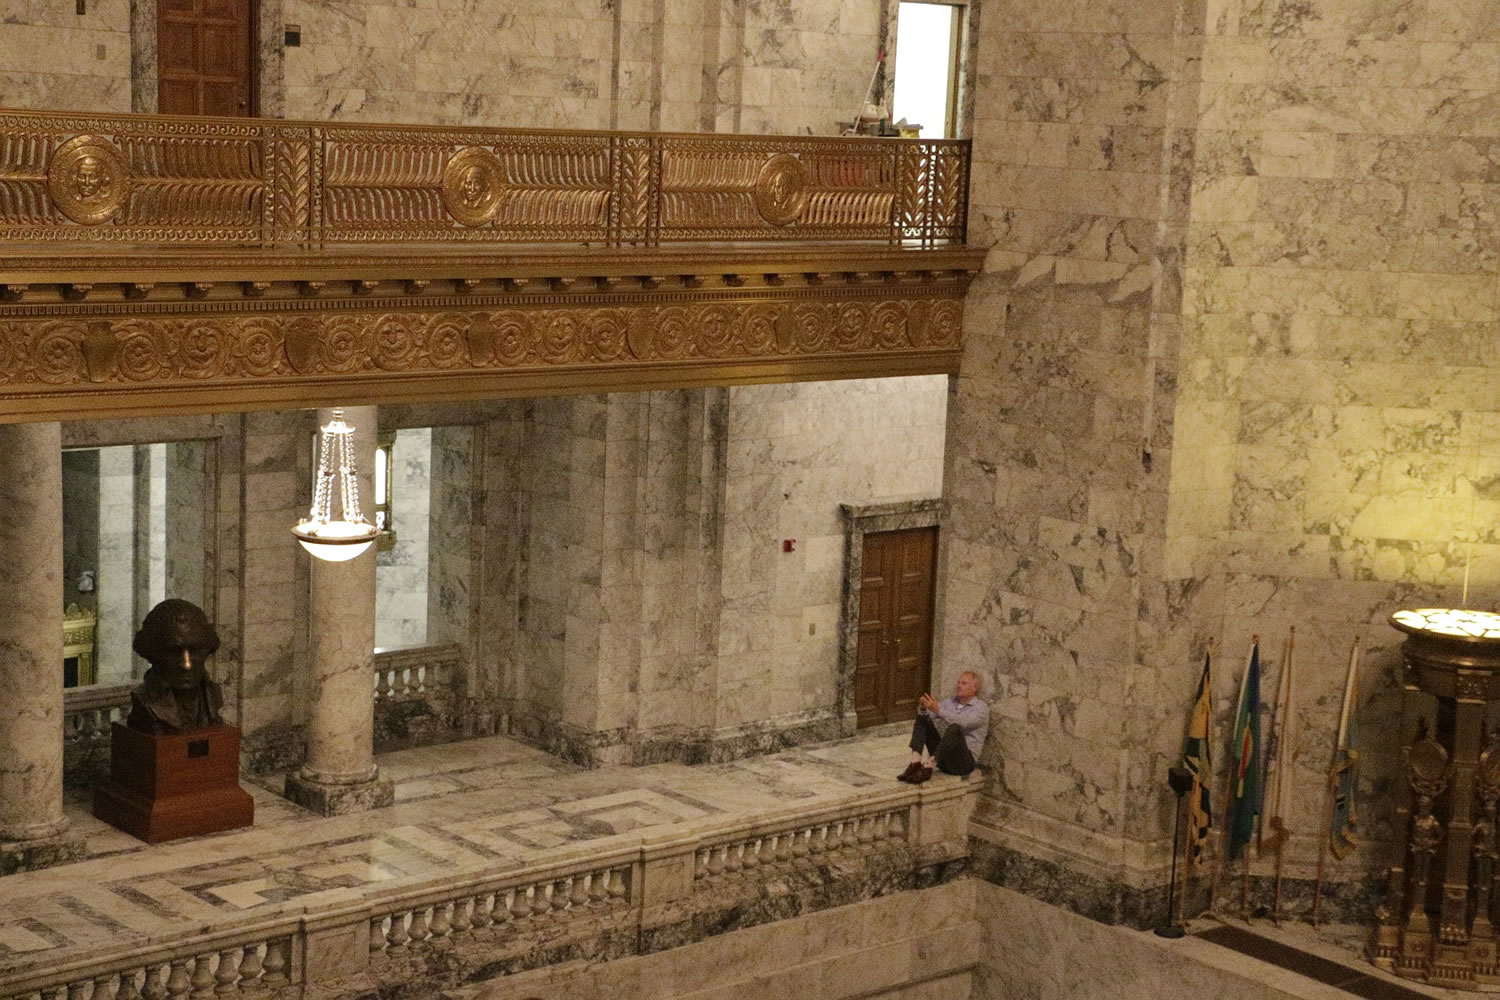 In this picture taken Friday, Democratic Rep. Reuven Carlyle takes a break in the Capitol rotunda from budget negotiations in Olympia.